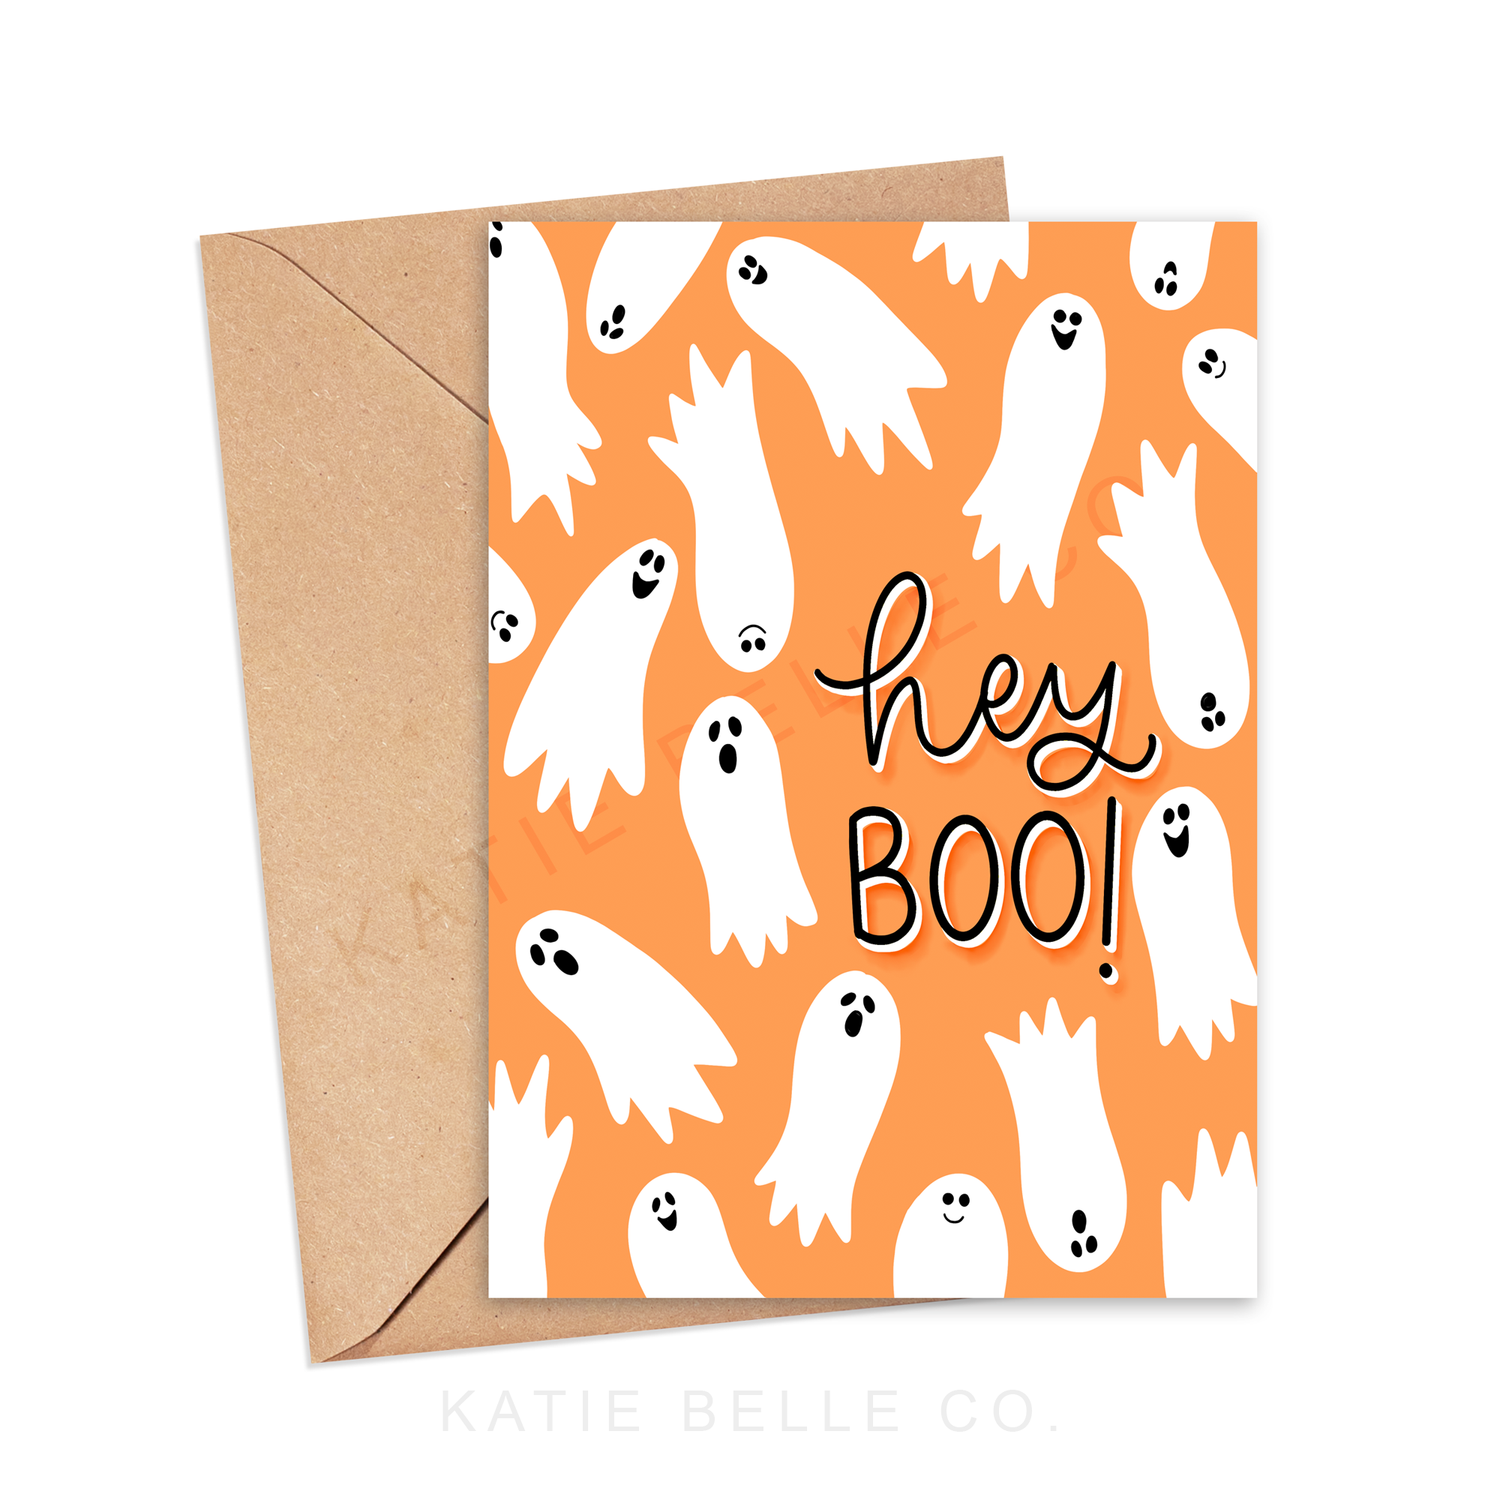 hey boo. greeting card. smiling ghost. floating ghost. Halloween greeting card. Best friend card. spooky season. fall greeting card. Blank inside. A2 size. envelope include. hand drawn. illustration. made by katie belle co. 